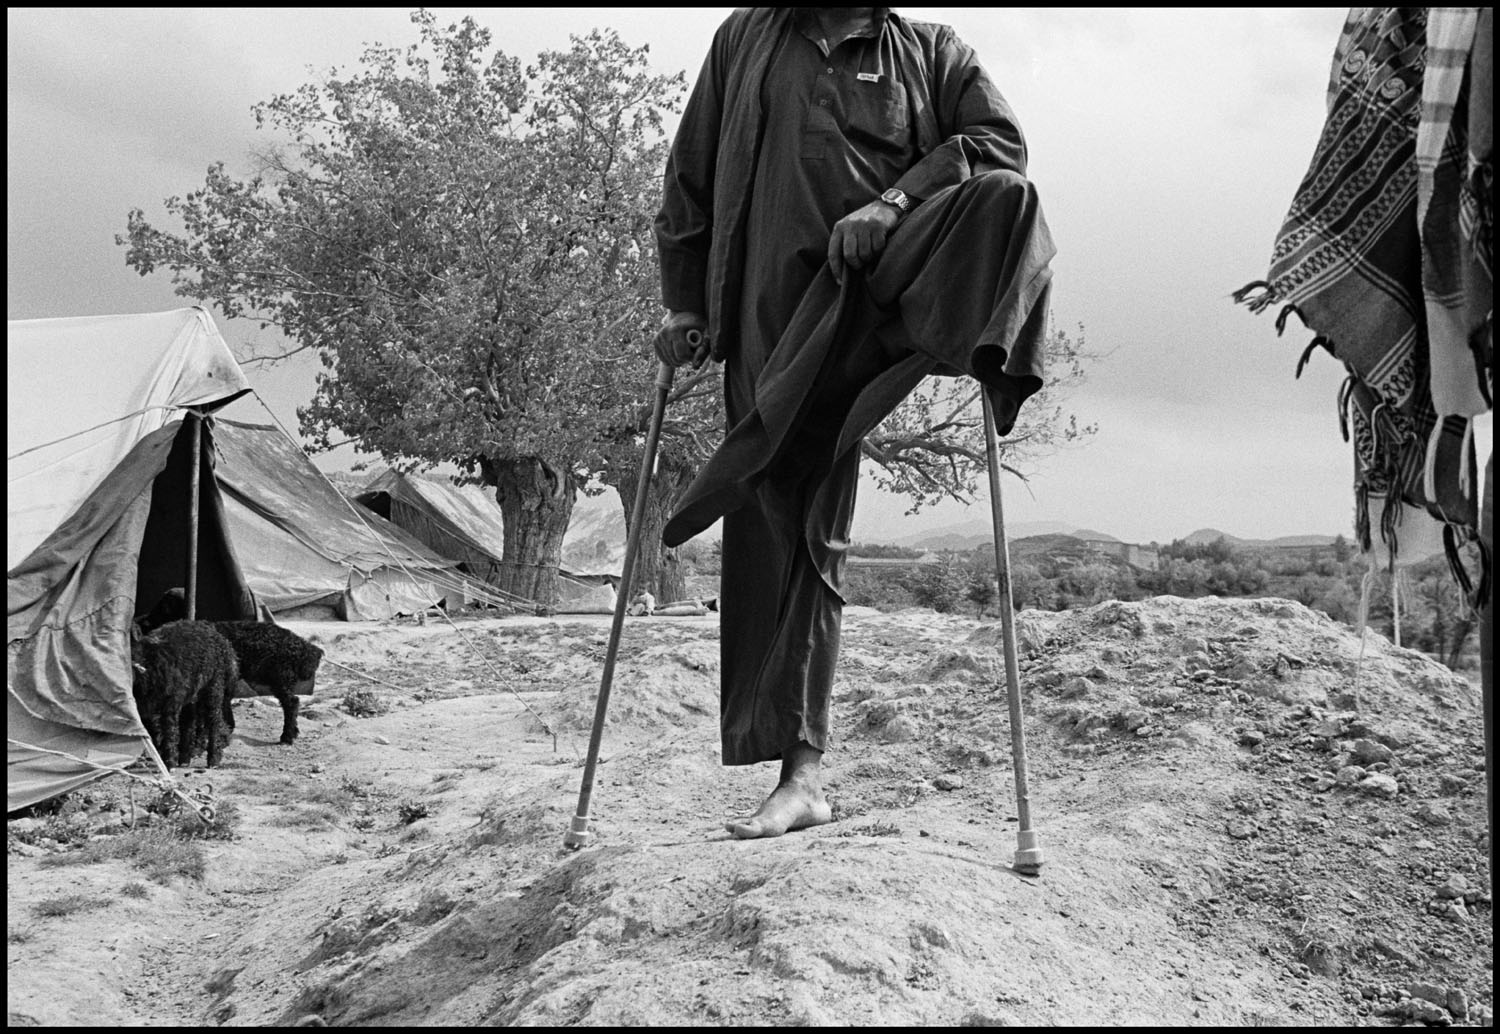 Kochi (nomad) landmine victim with tents for sheep and family members. Shomoli Plain. Afghanistan. May, 2009.